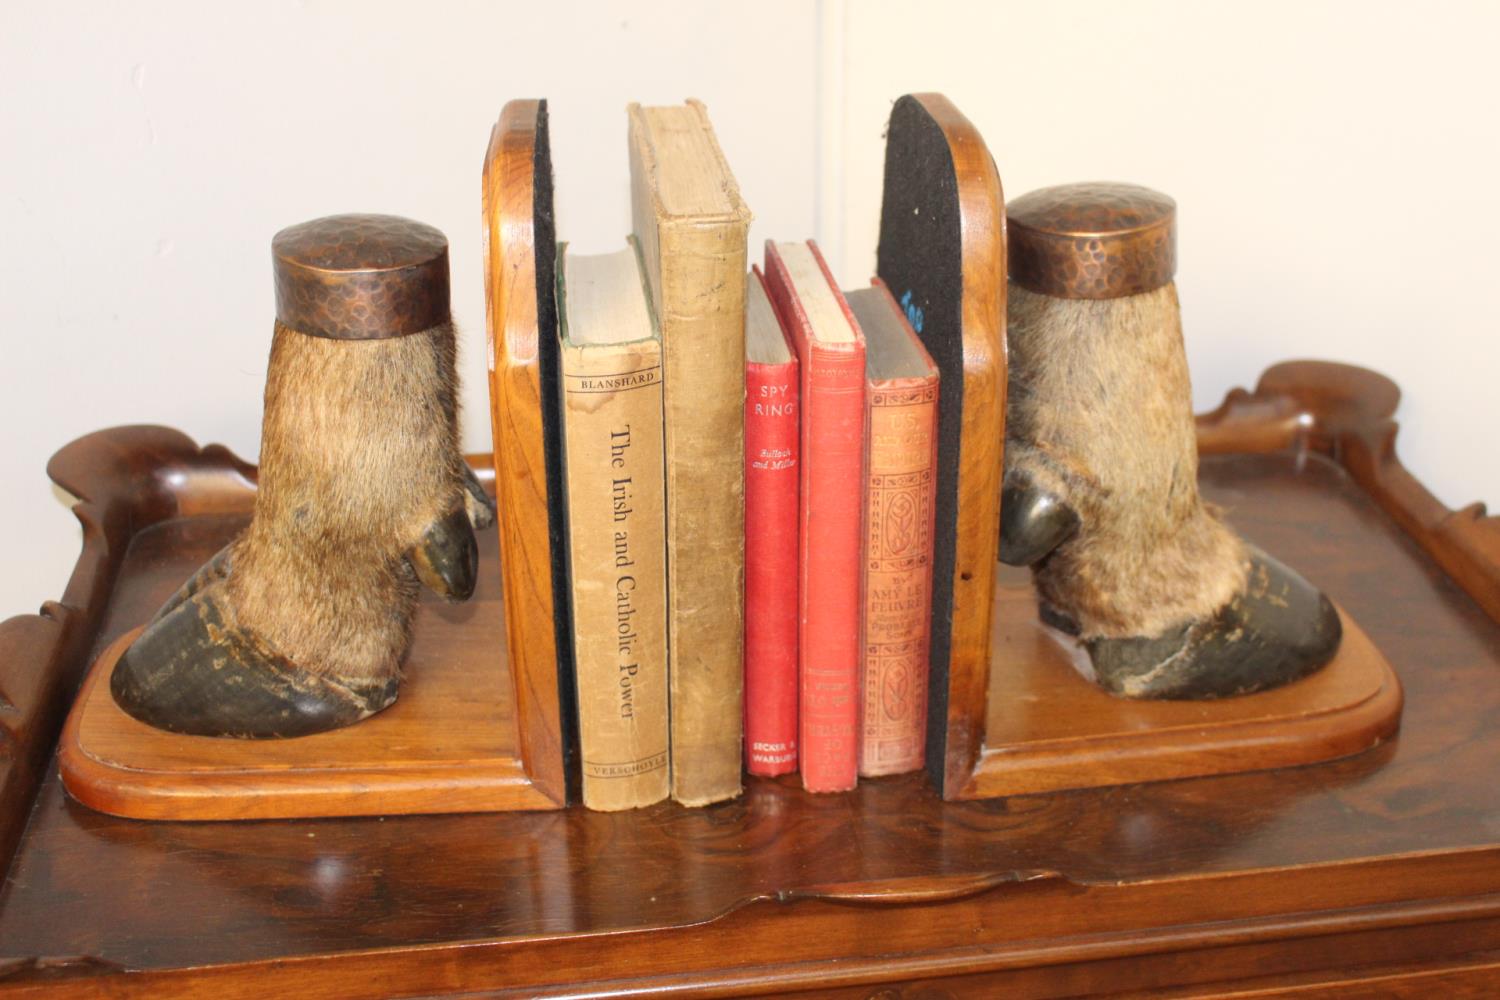 Pair of bookends with Hoof decoration.